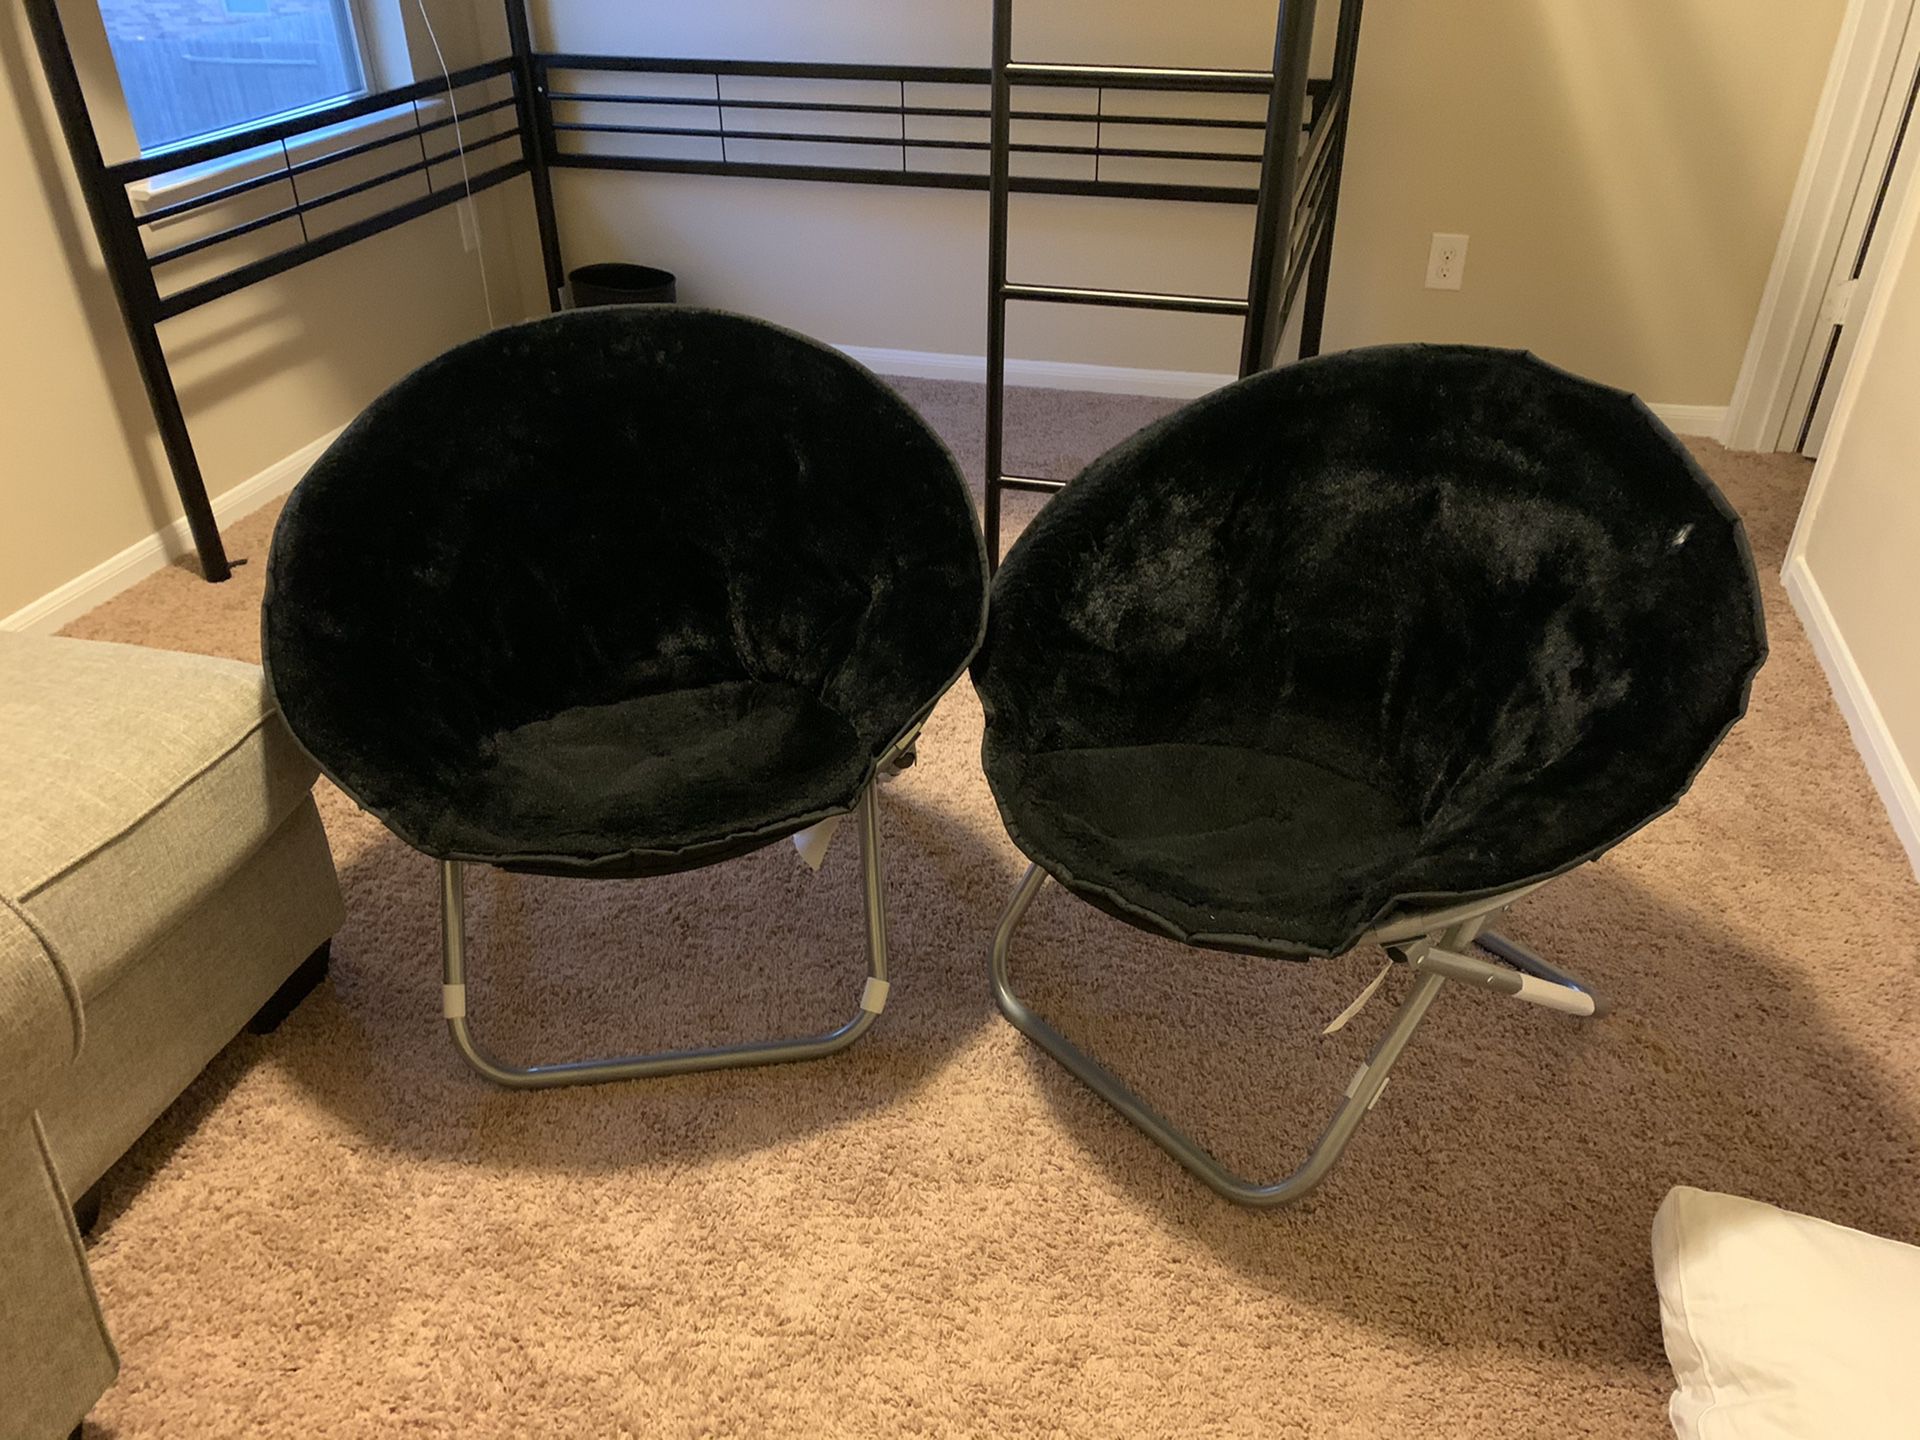 Set of two foldable chairs (will accommodate adults)